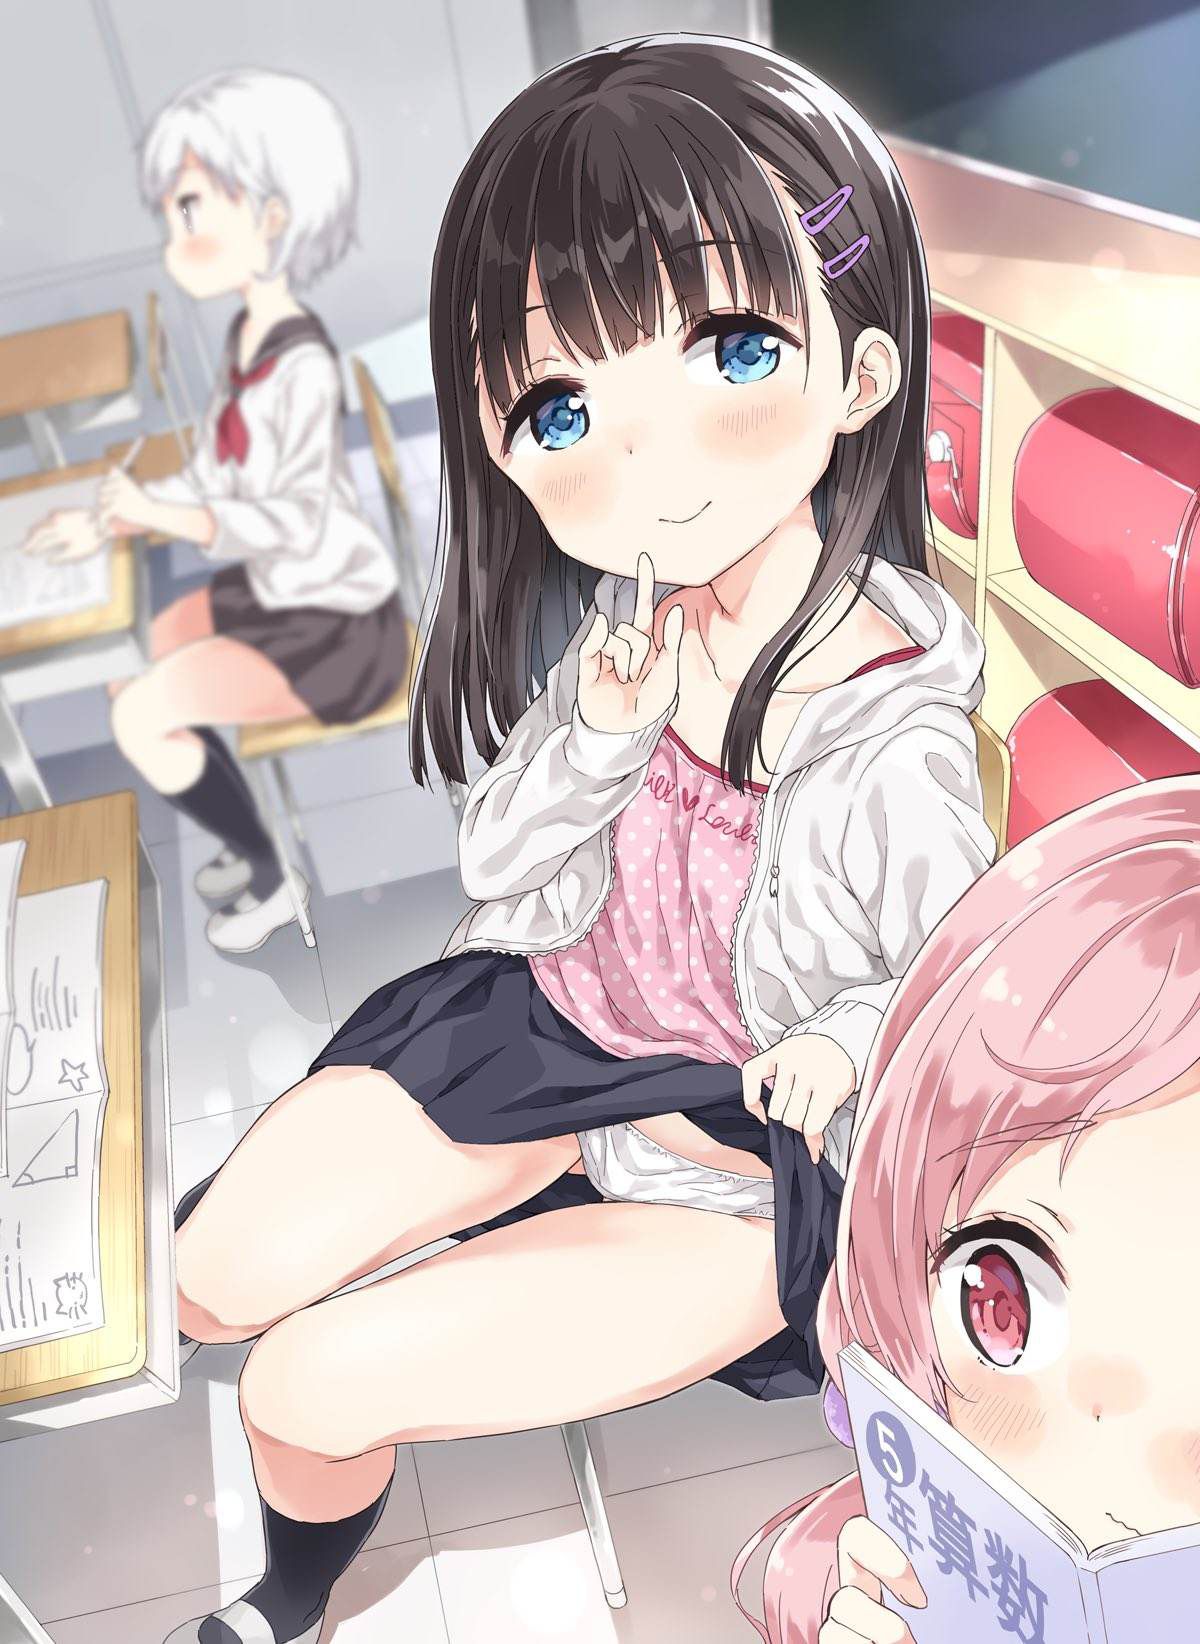 I thought I wouldn't be able to see it under the desk. I'm starting "Waruikoto" even though there are other people in the room♀ www (3) 47